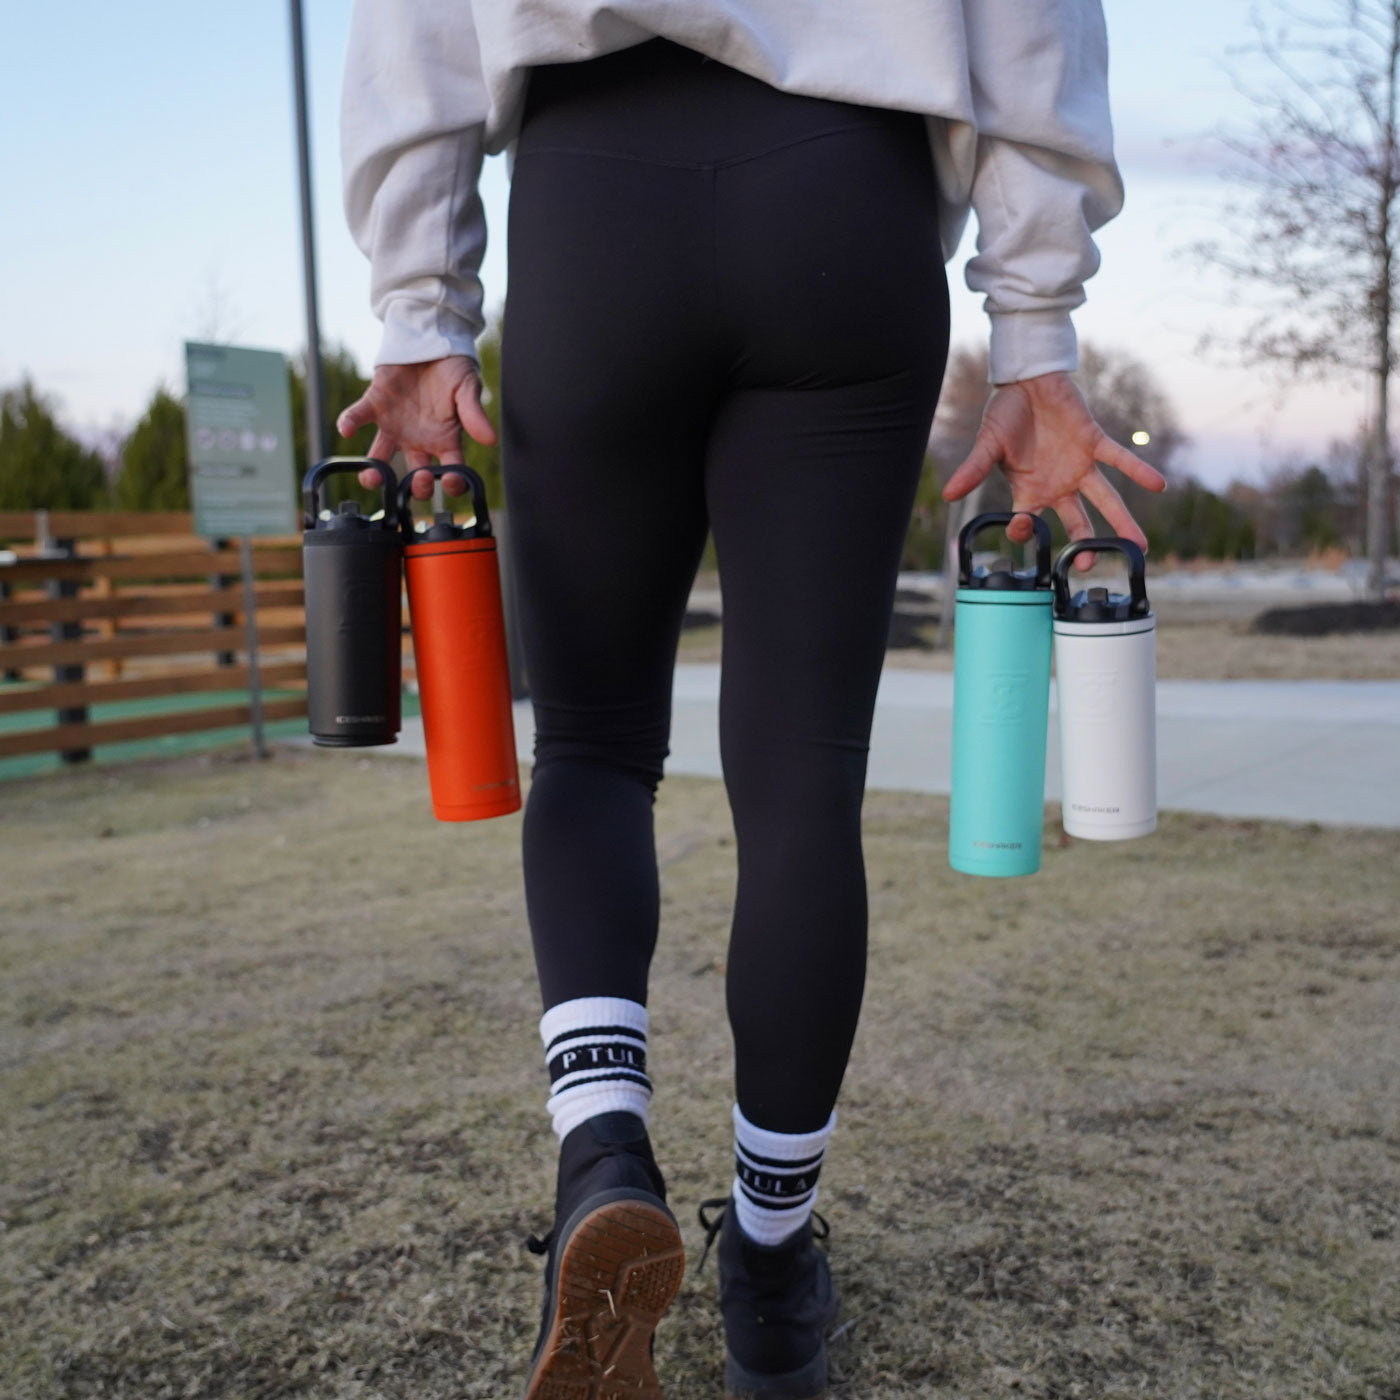 This image shows four different colored Sport Bottles being carried by their handles. A woman is holding them with both of her hands and she is walking away from the camera.